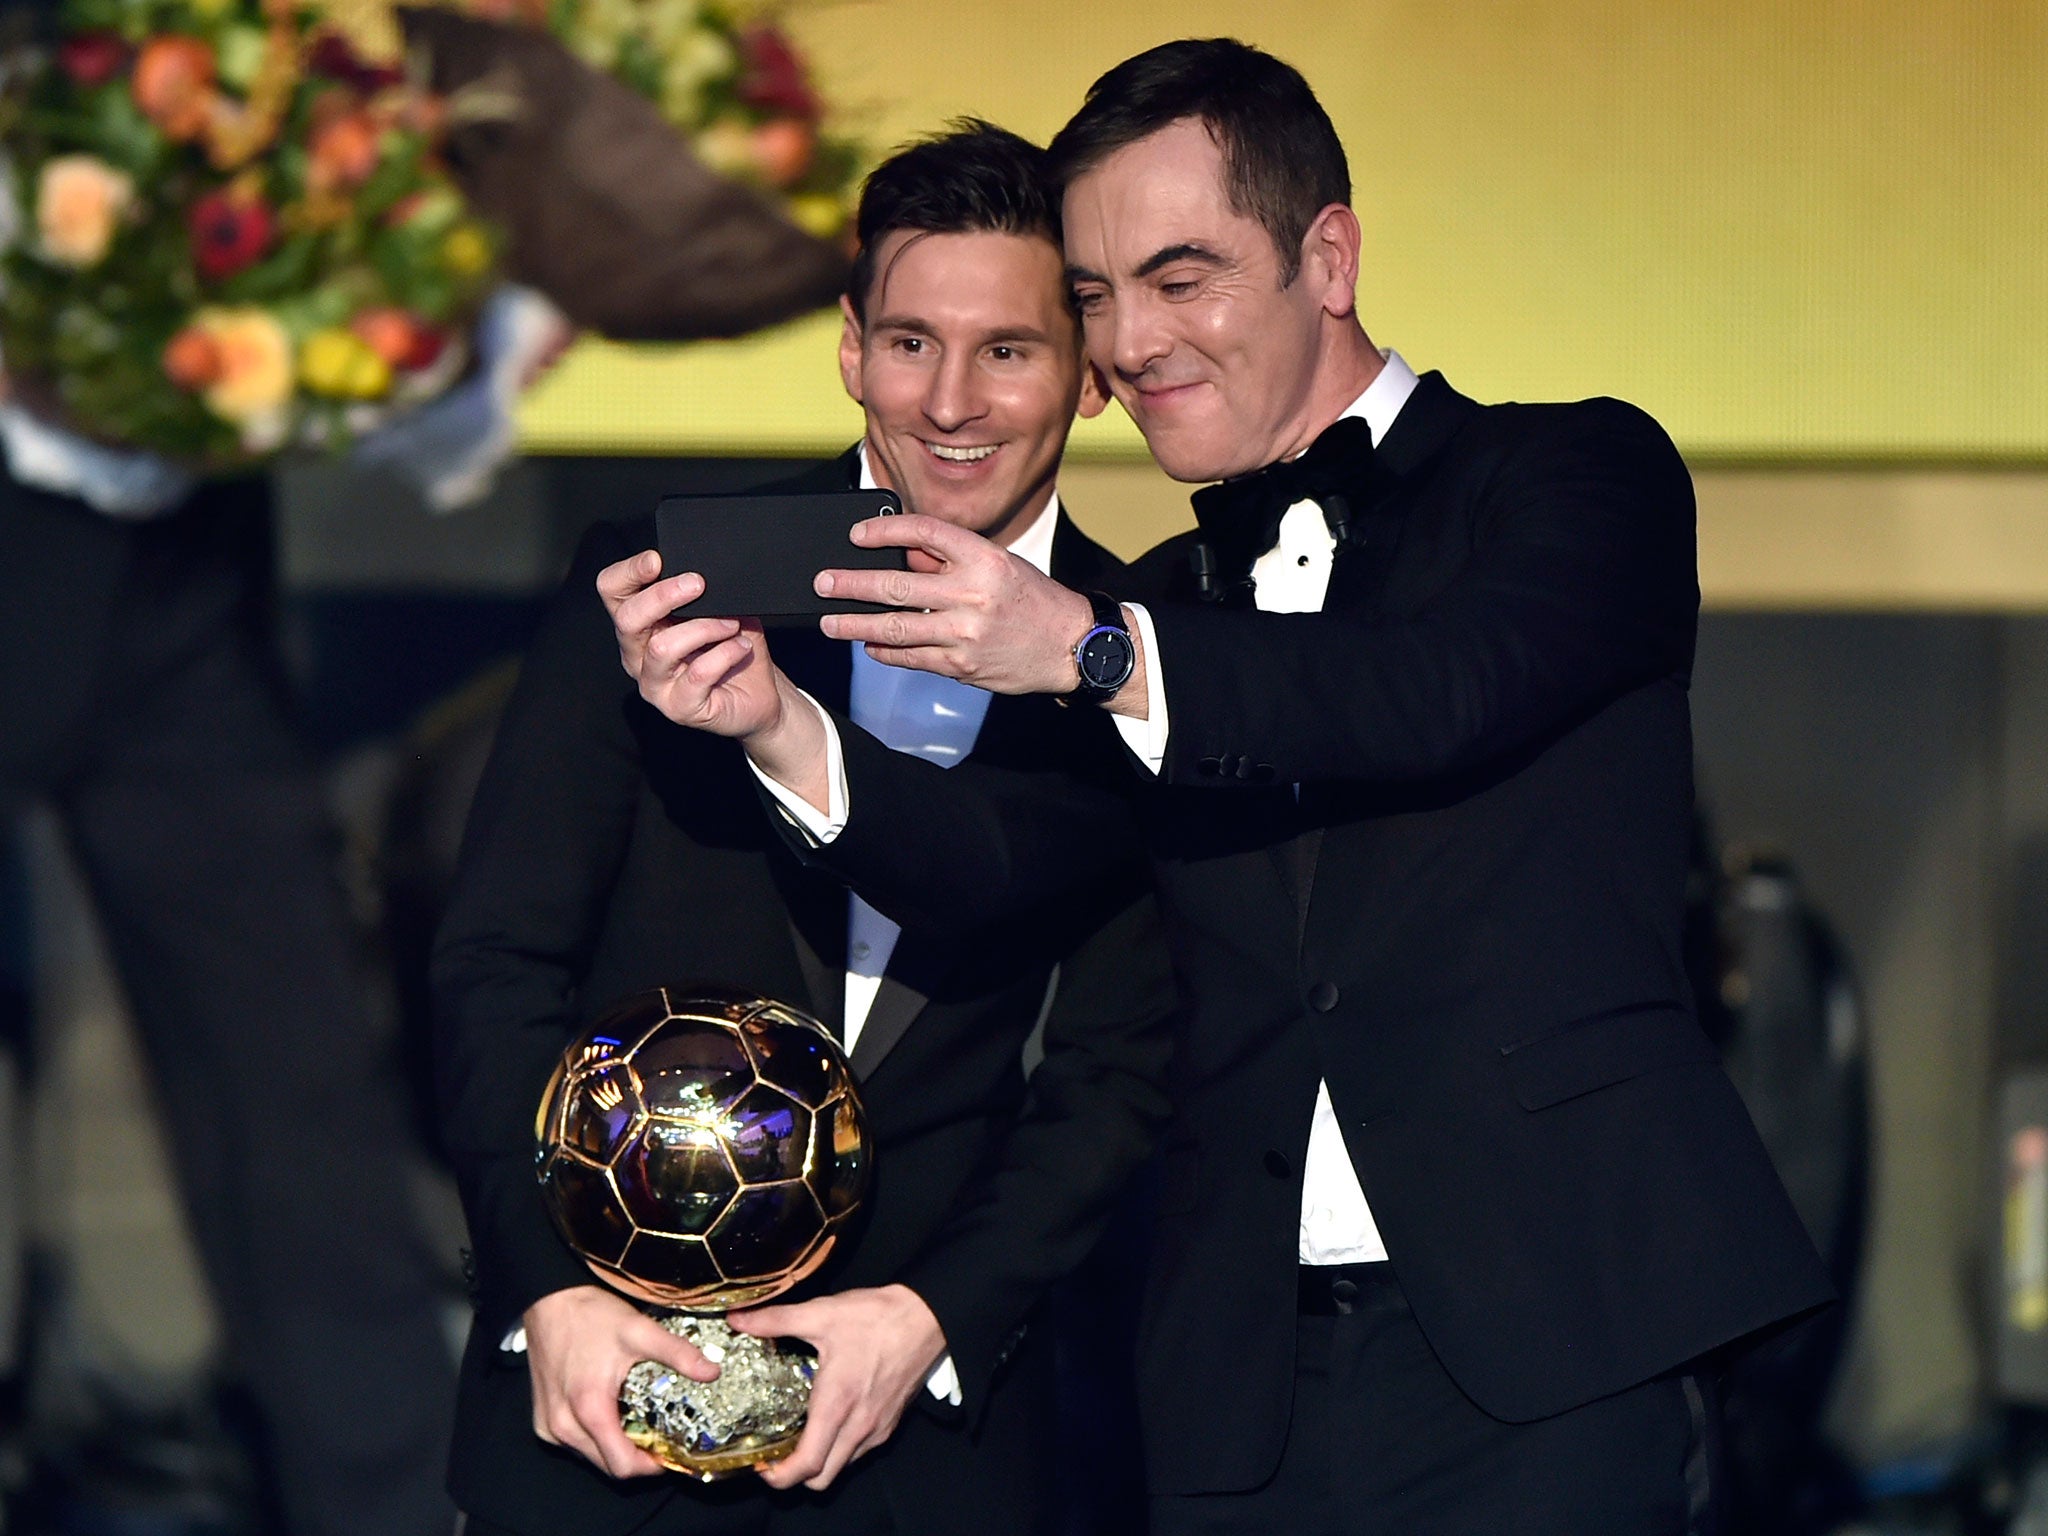 Lionel Messi poses for a selfie with James Nesbitt after winning the Ballon d'Or